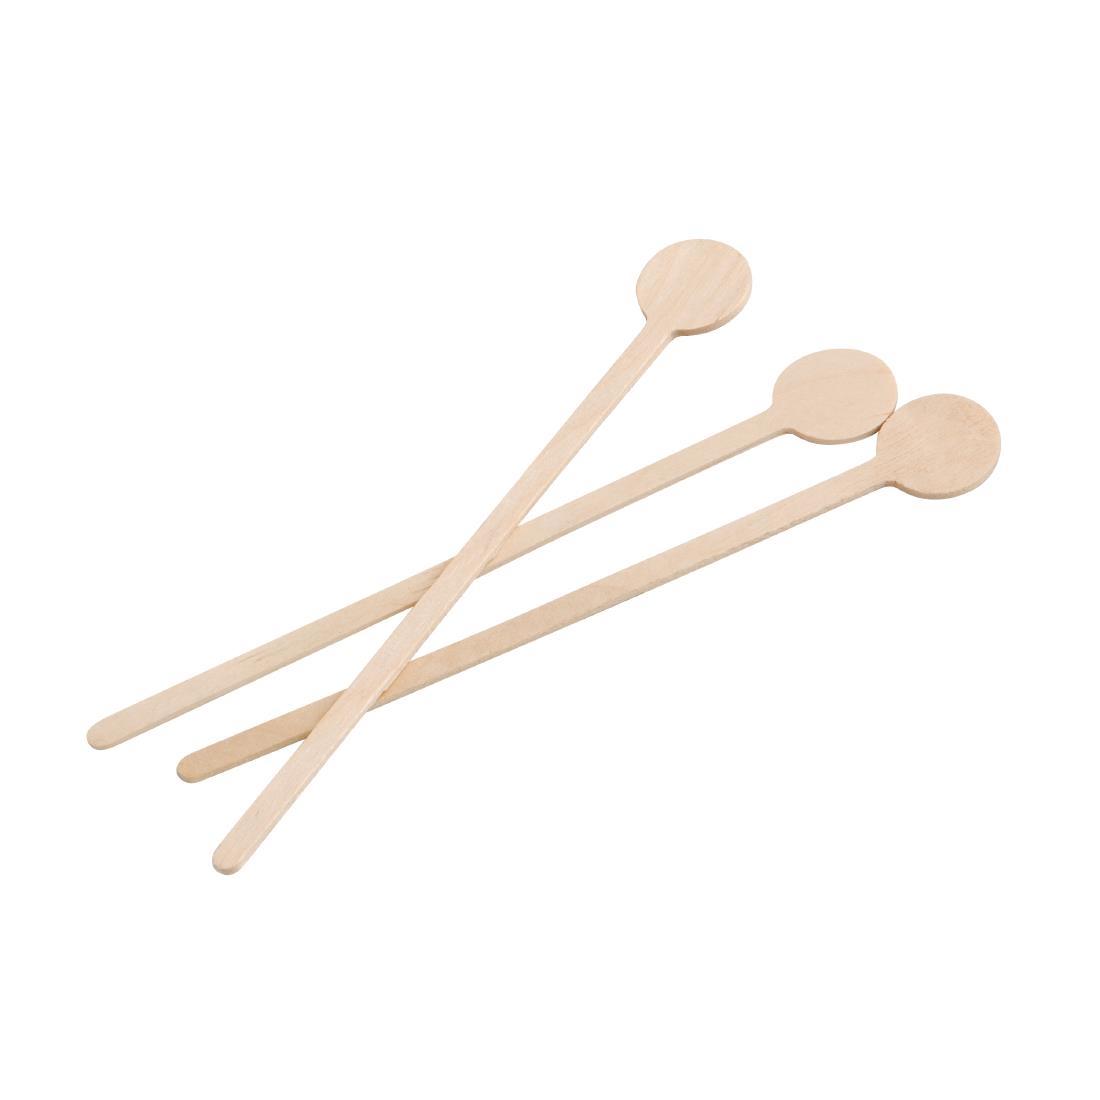 Fiesta Compostable Wooden Cocktail Stirrers 150mm (Pack of 100) - DB493  - 2